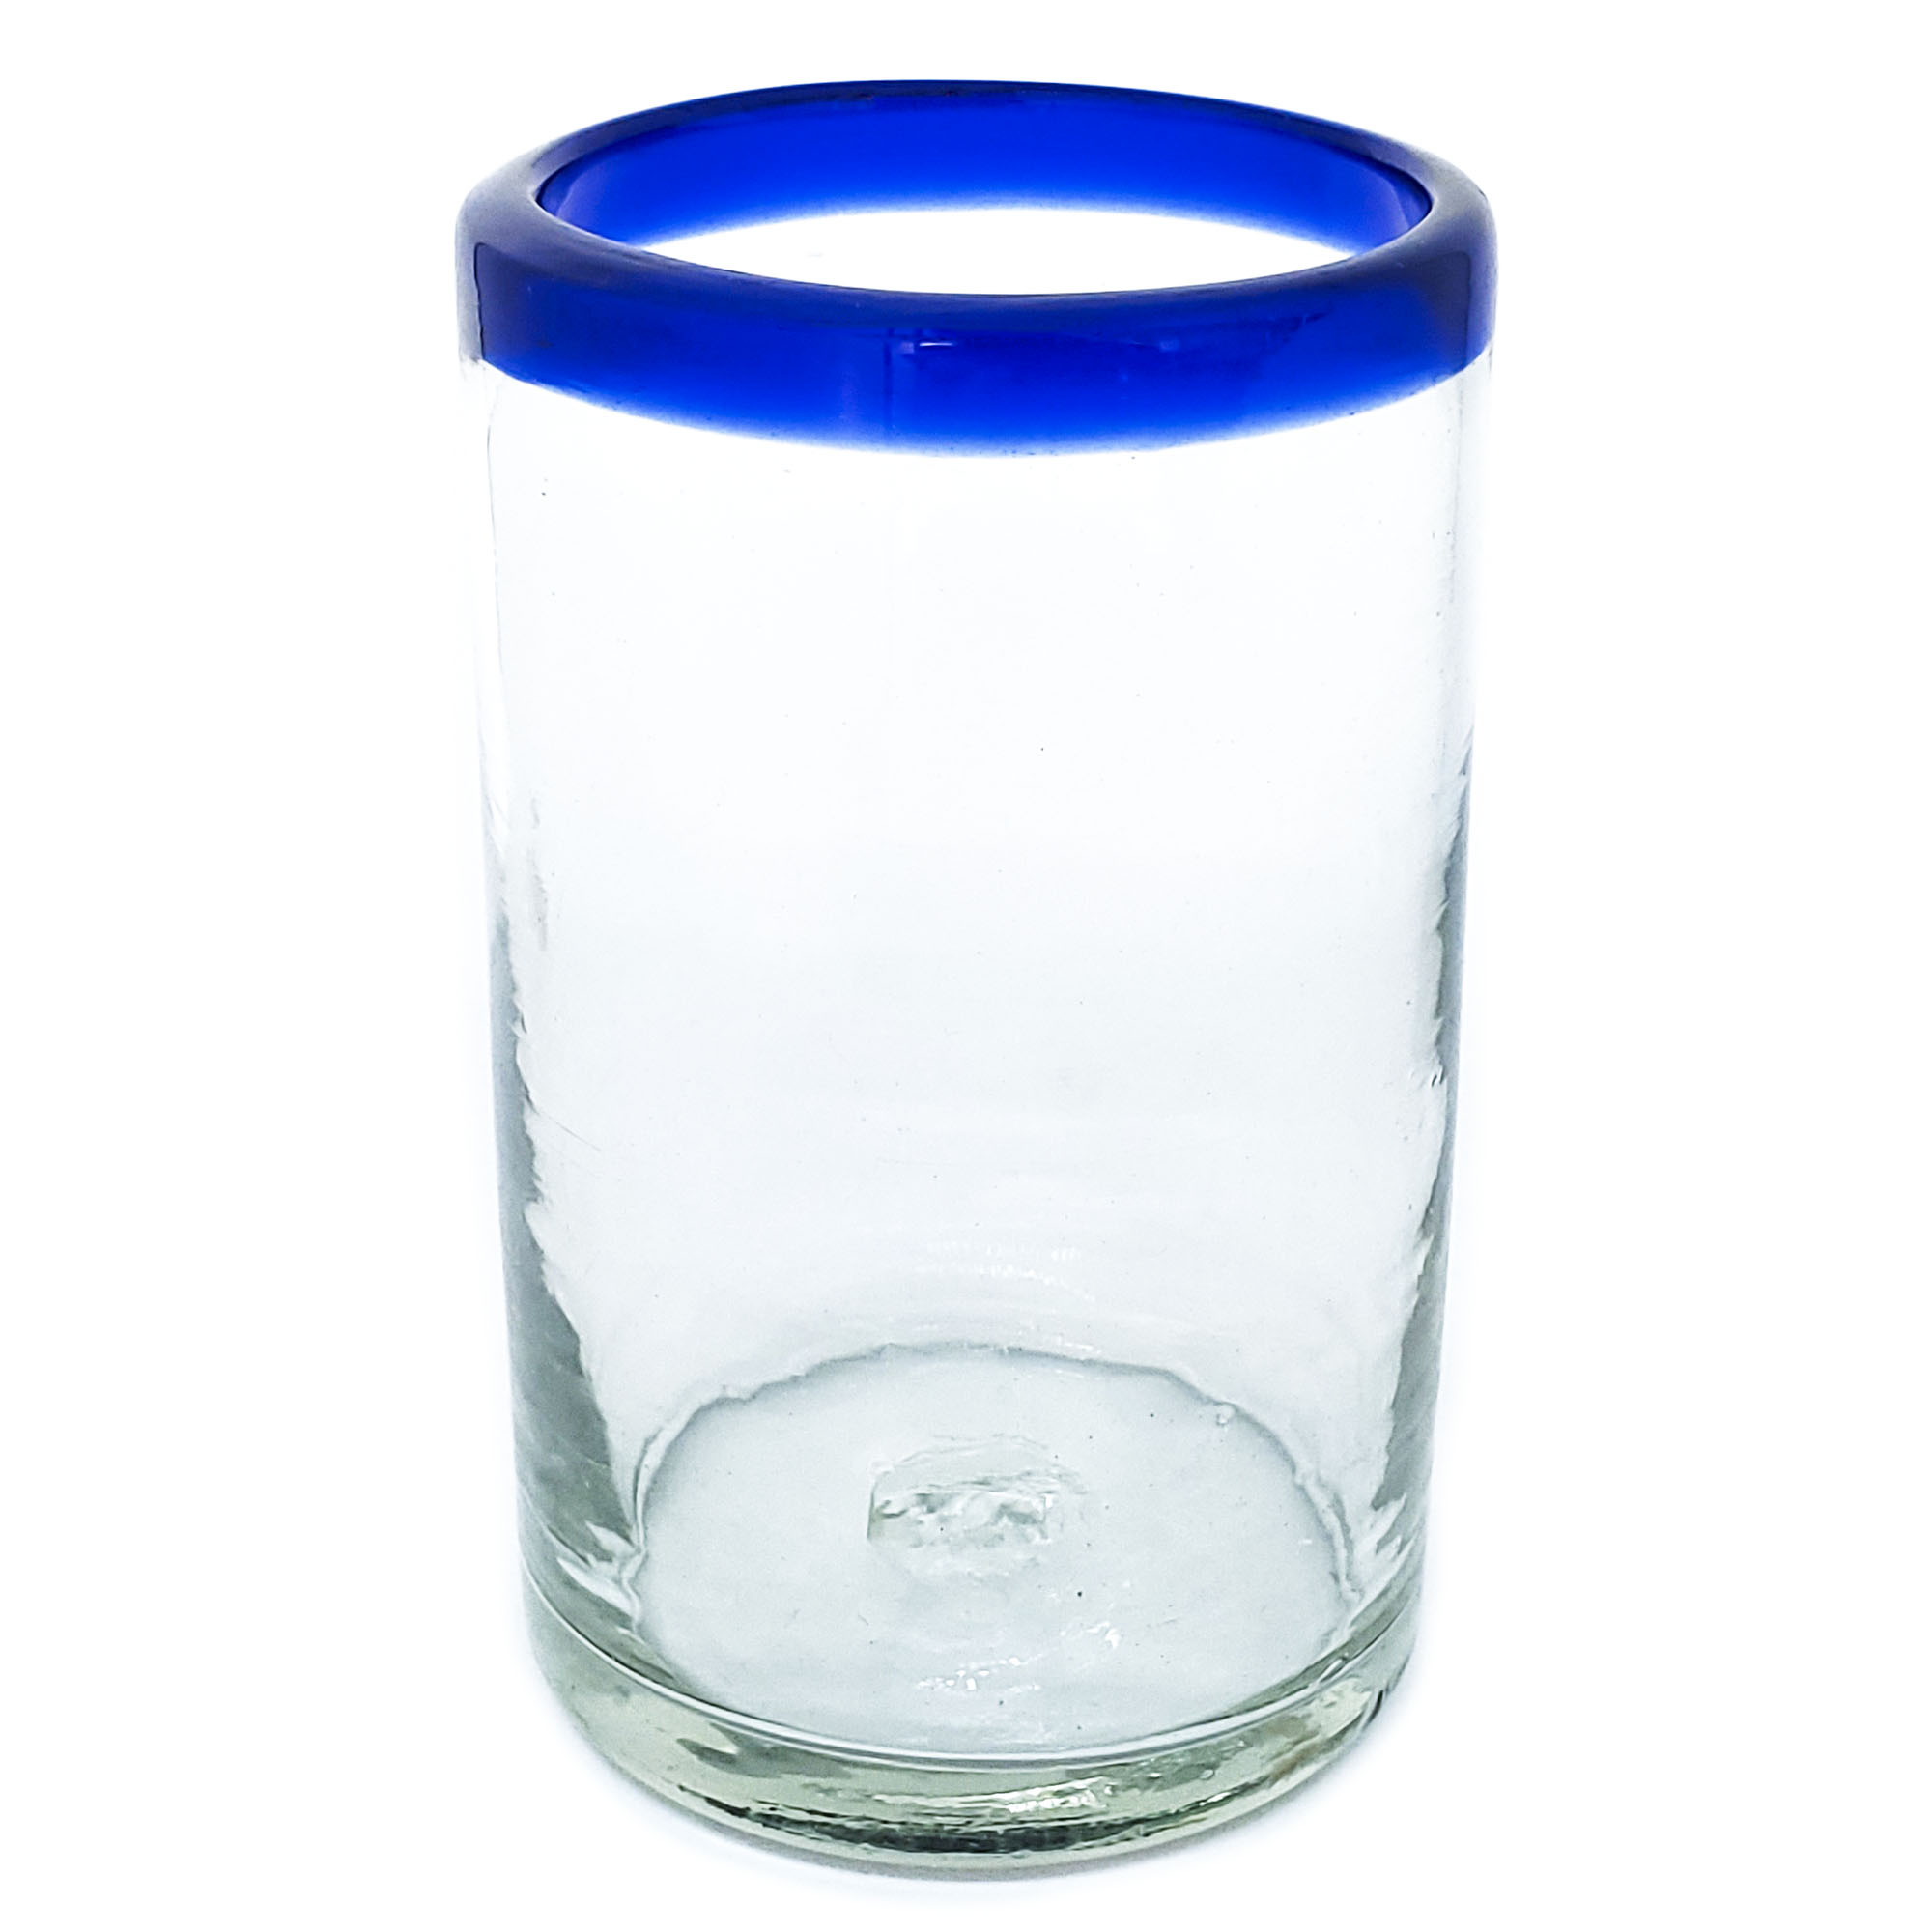 Wholesale Mexican Glasses / Cobalt Blue Rim 14 oz Drinking Glasses  / These handcrafted glasses deliver a classic touch to your favorite drink.